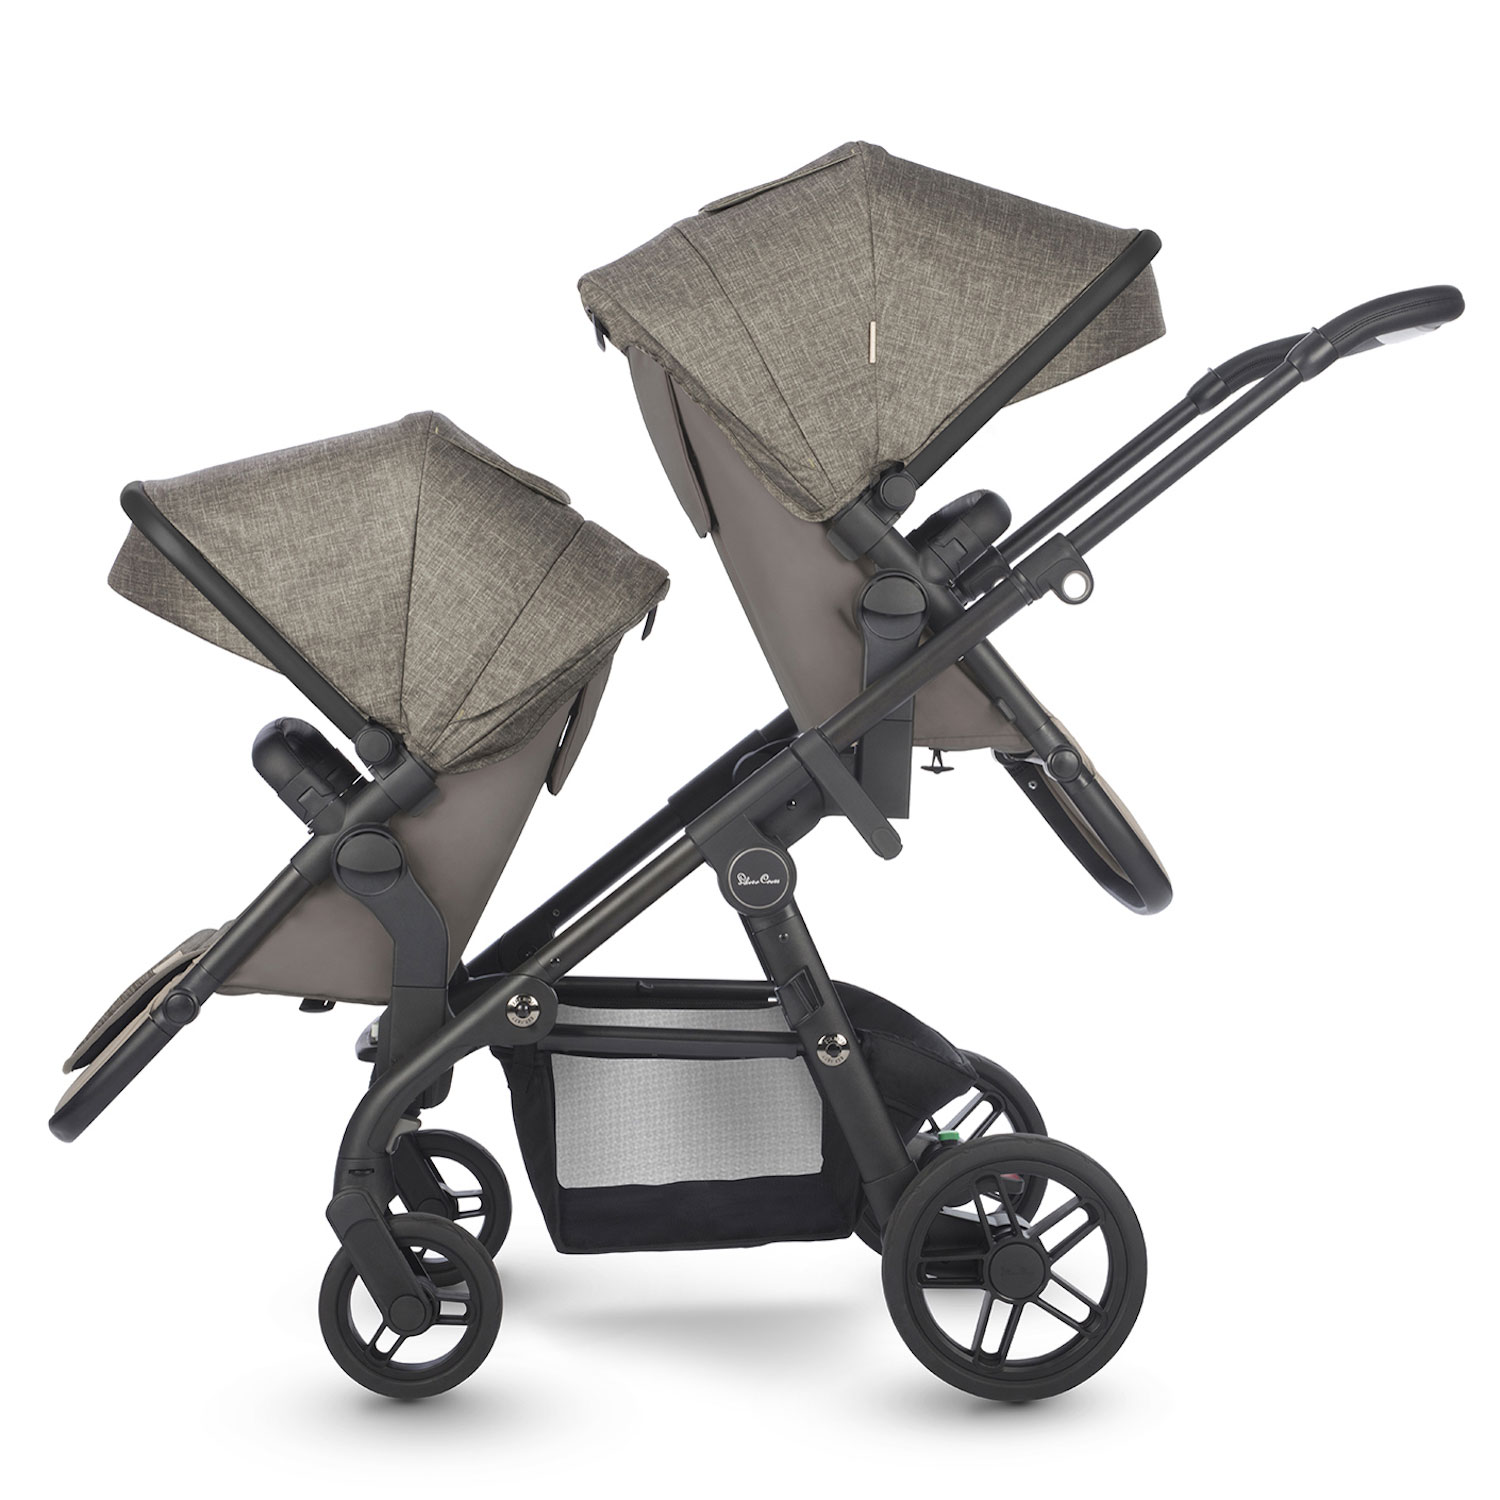 second hand strollers uk